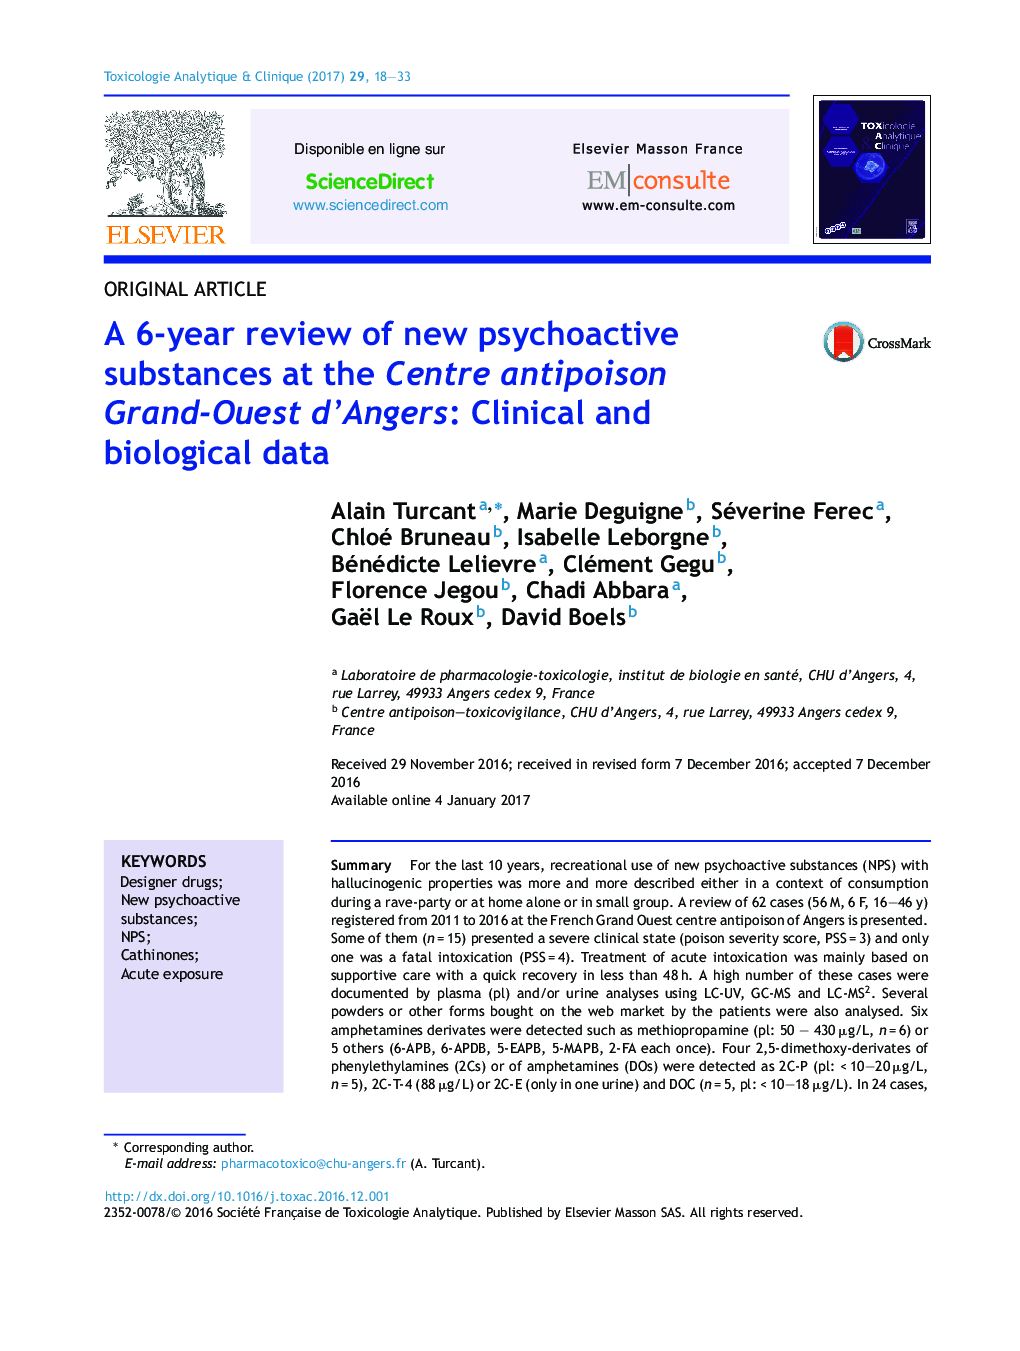 A 6-year review of new psychoactive substances at the Centre antipoison Grand-Ouest d'Angers: Clinical and biological data